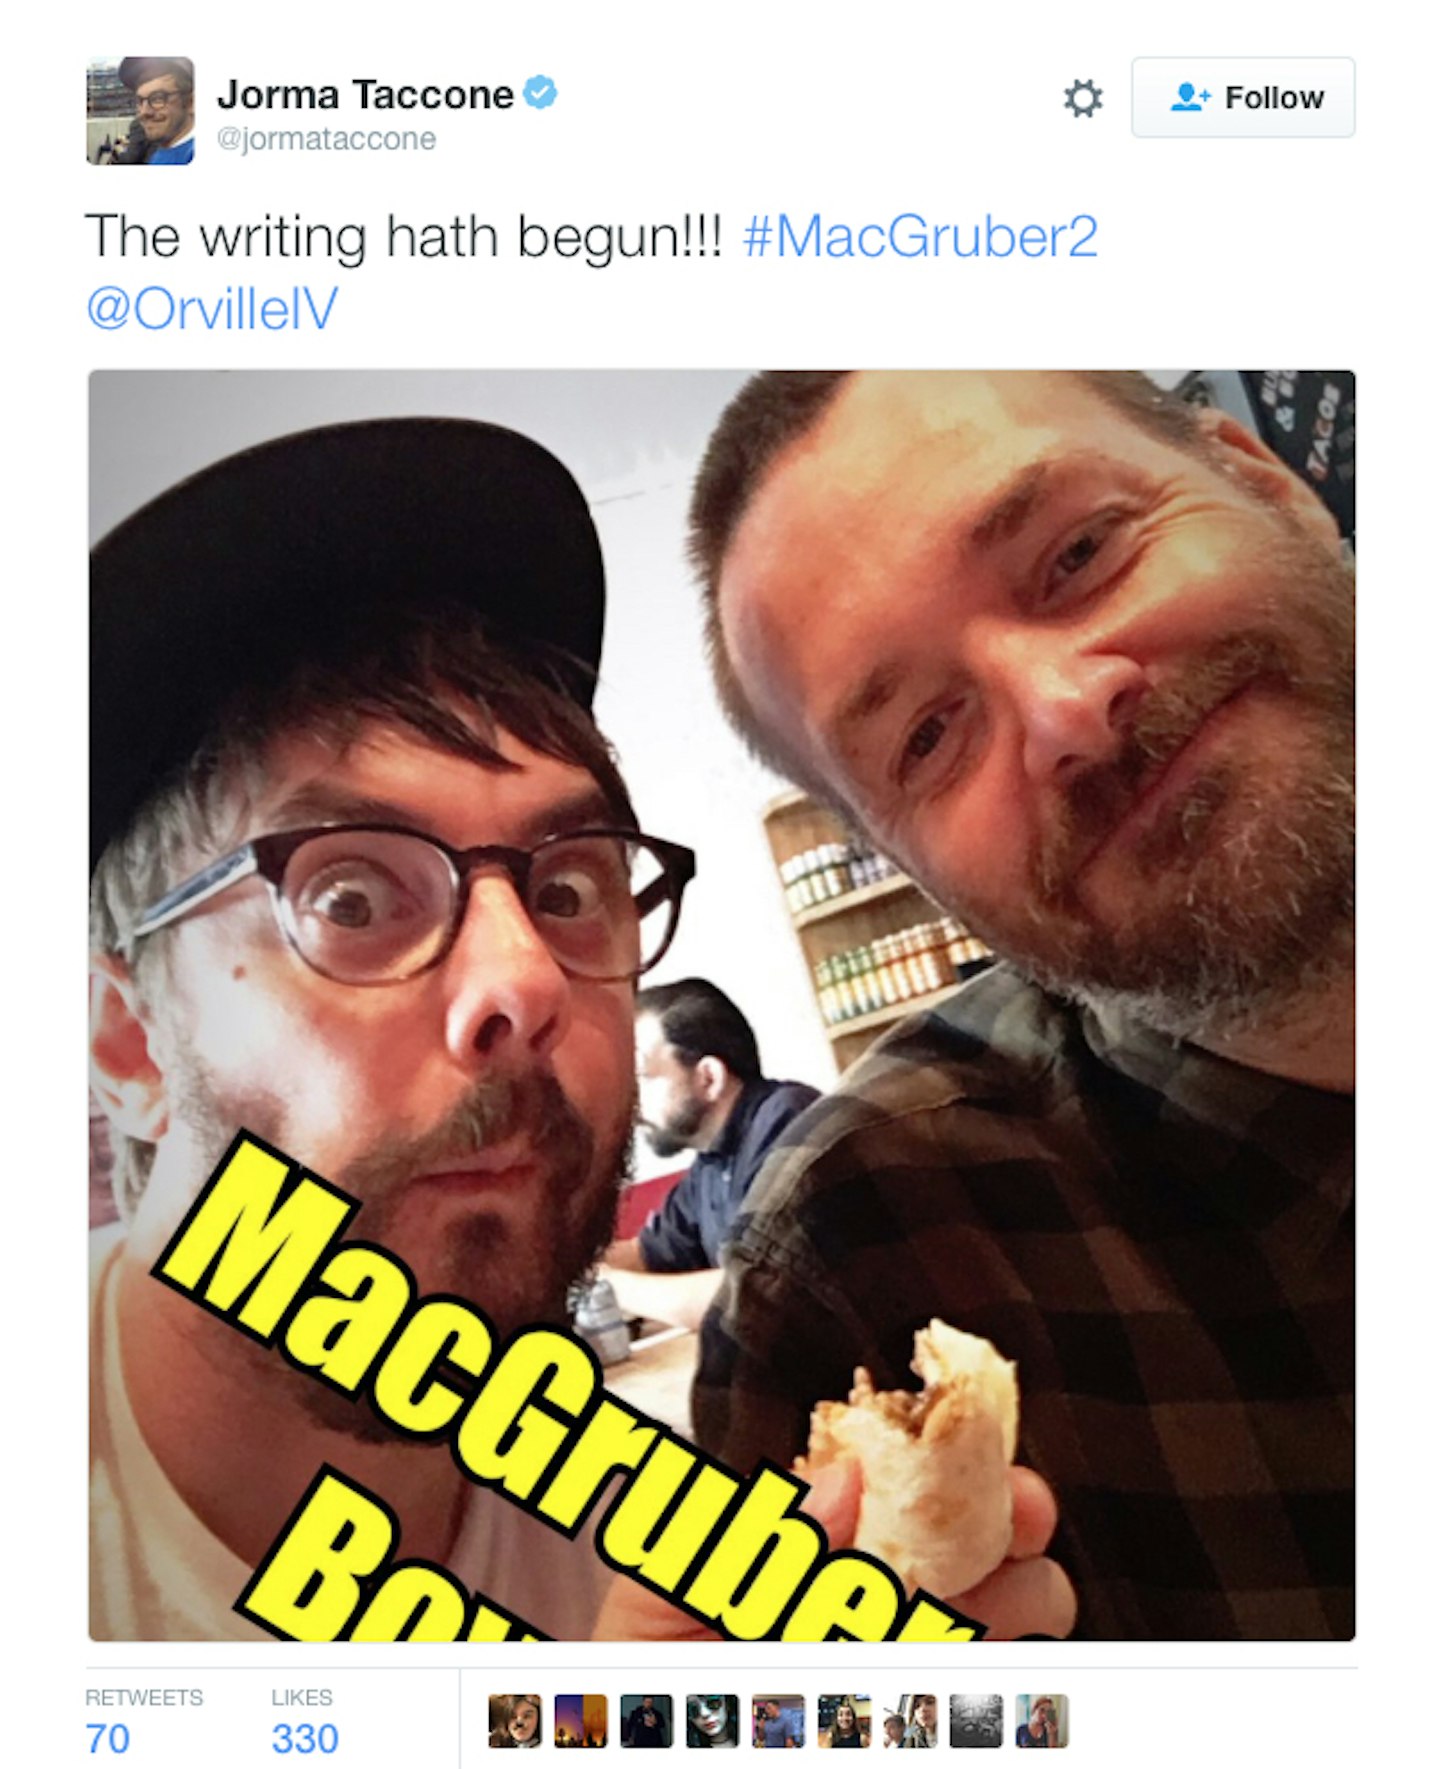 Jorma Taccone's tweet about writing the MacGruber sequel